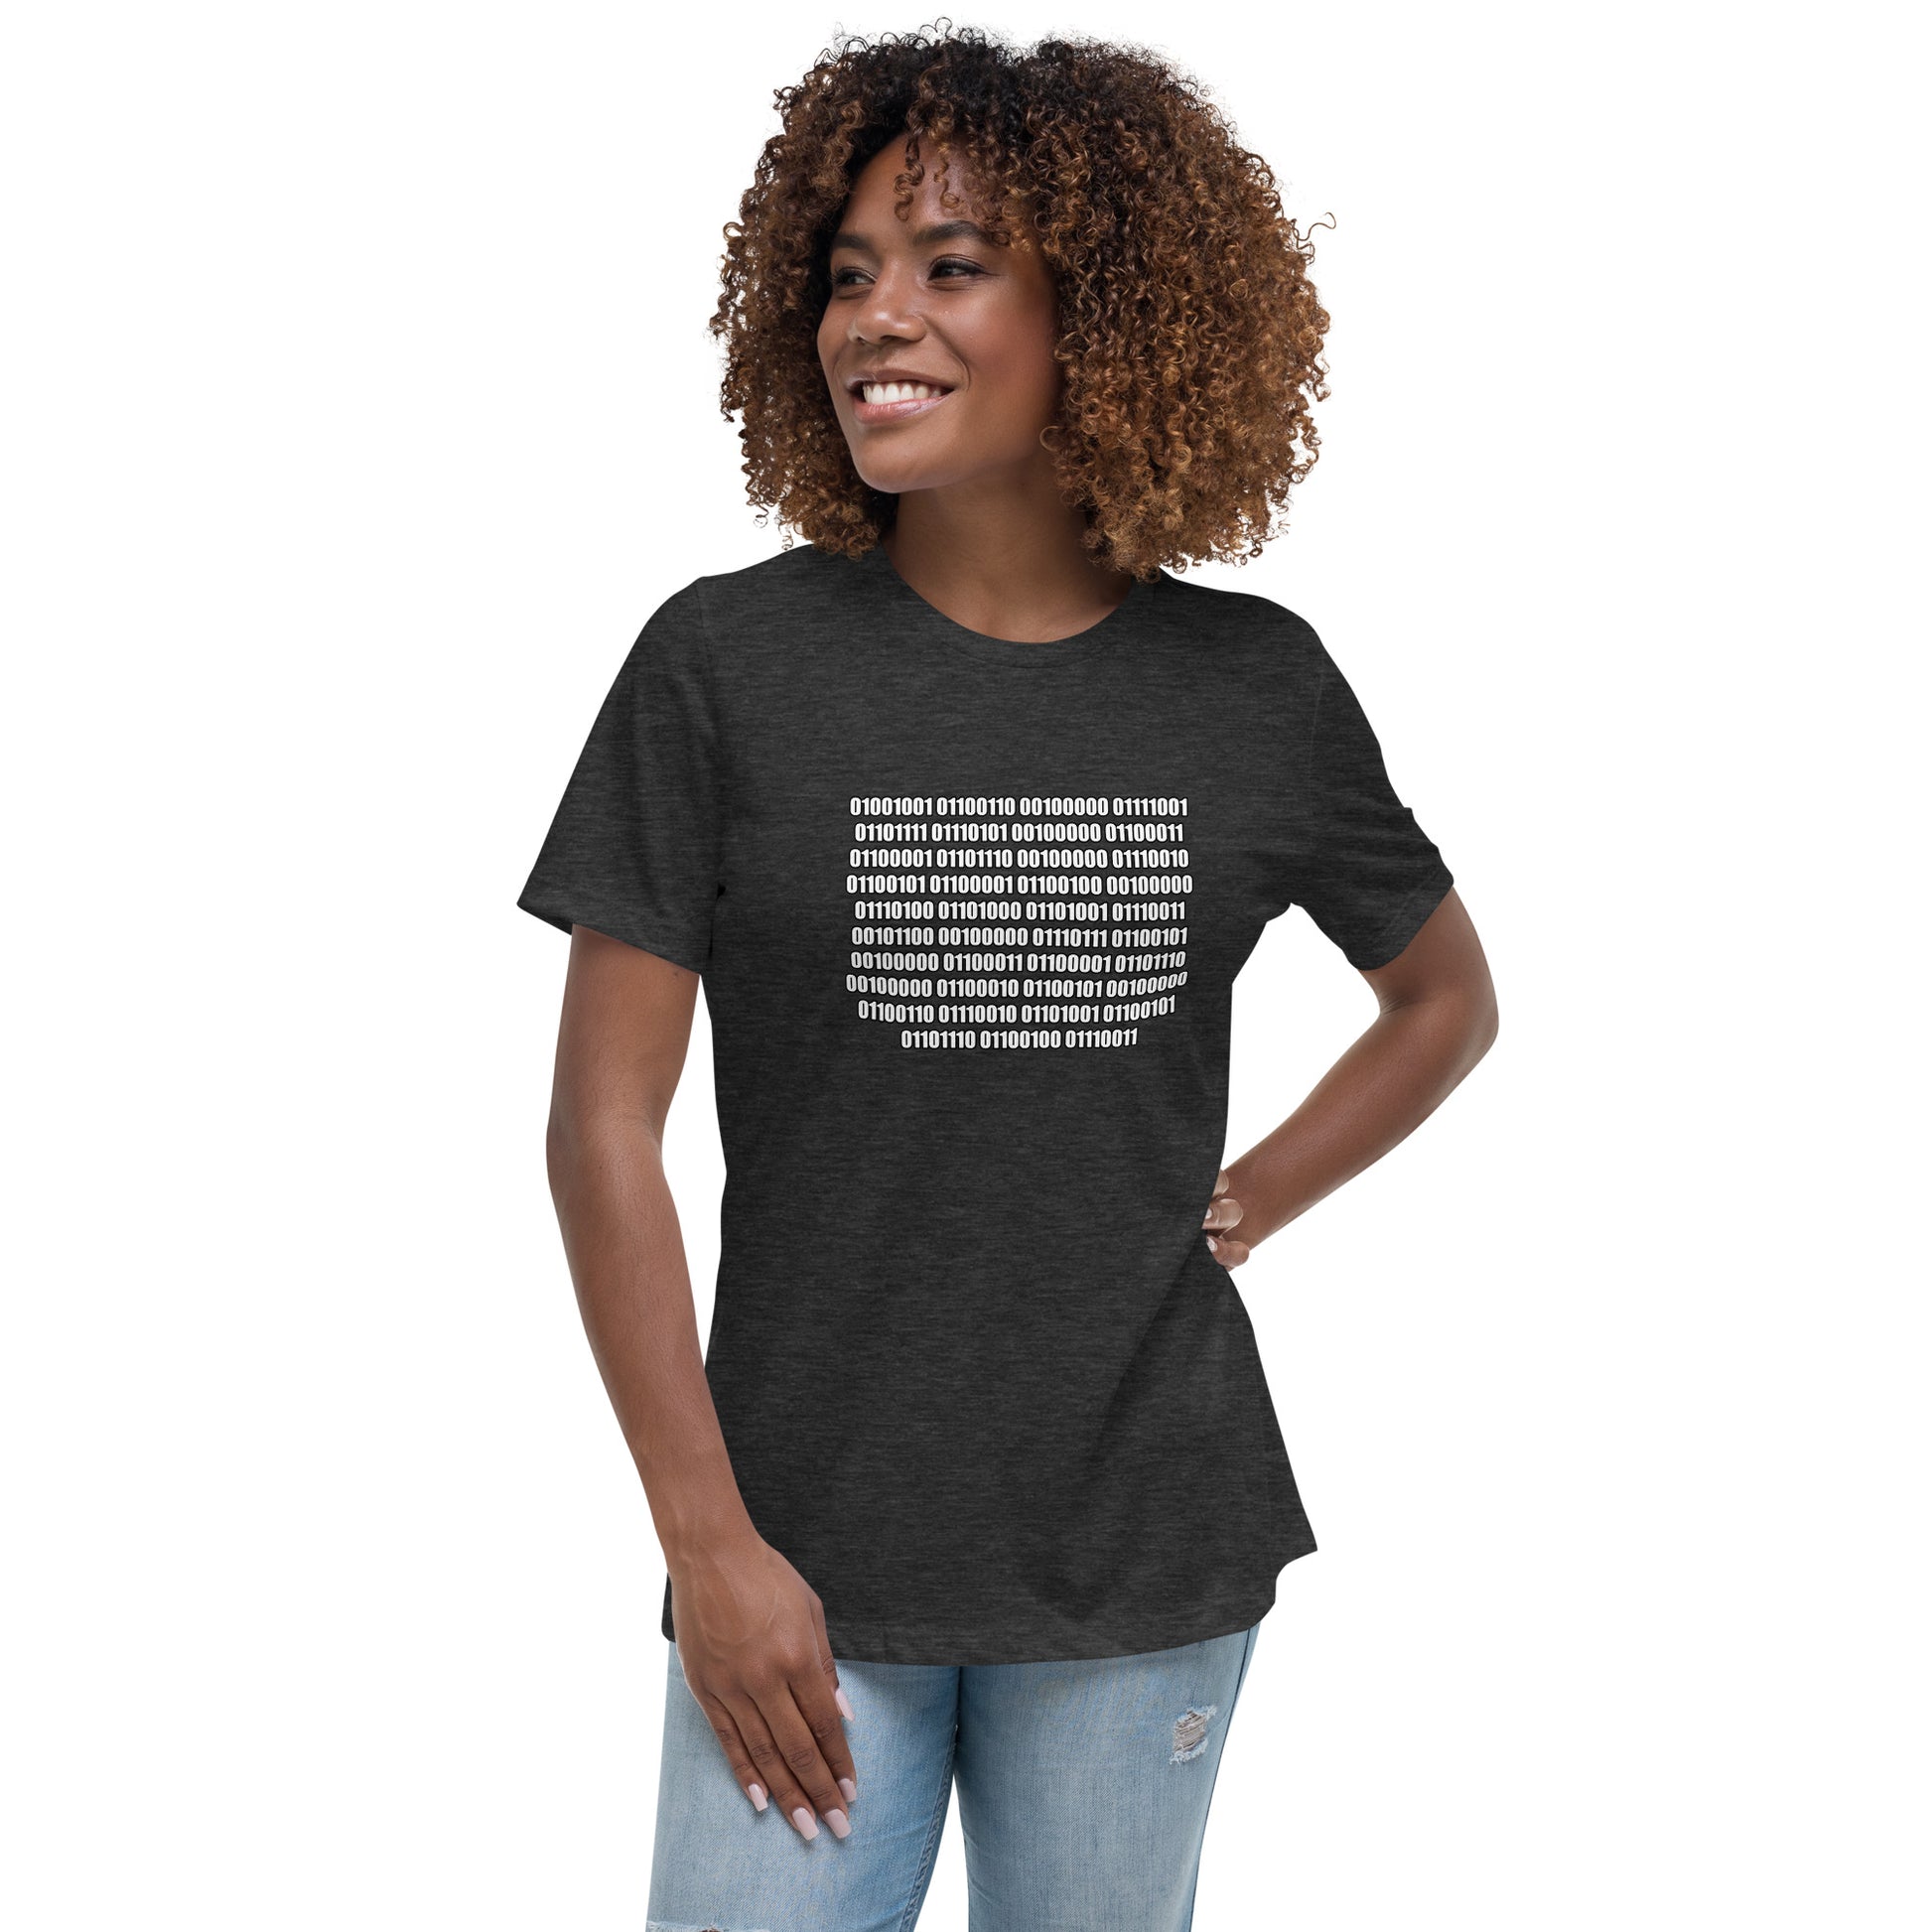 Woman with dark grey t-shirt with binary code "If you can read this"